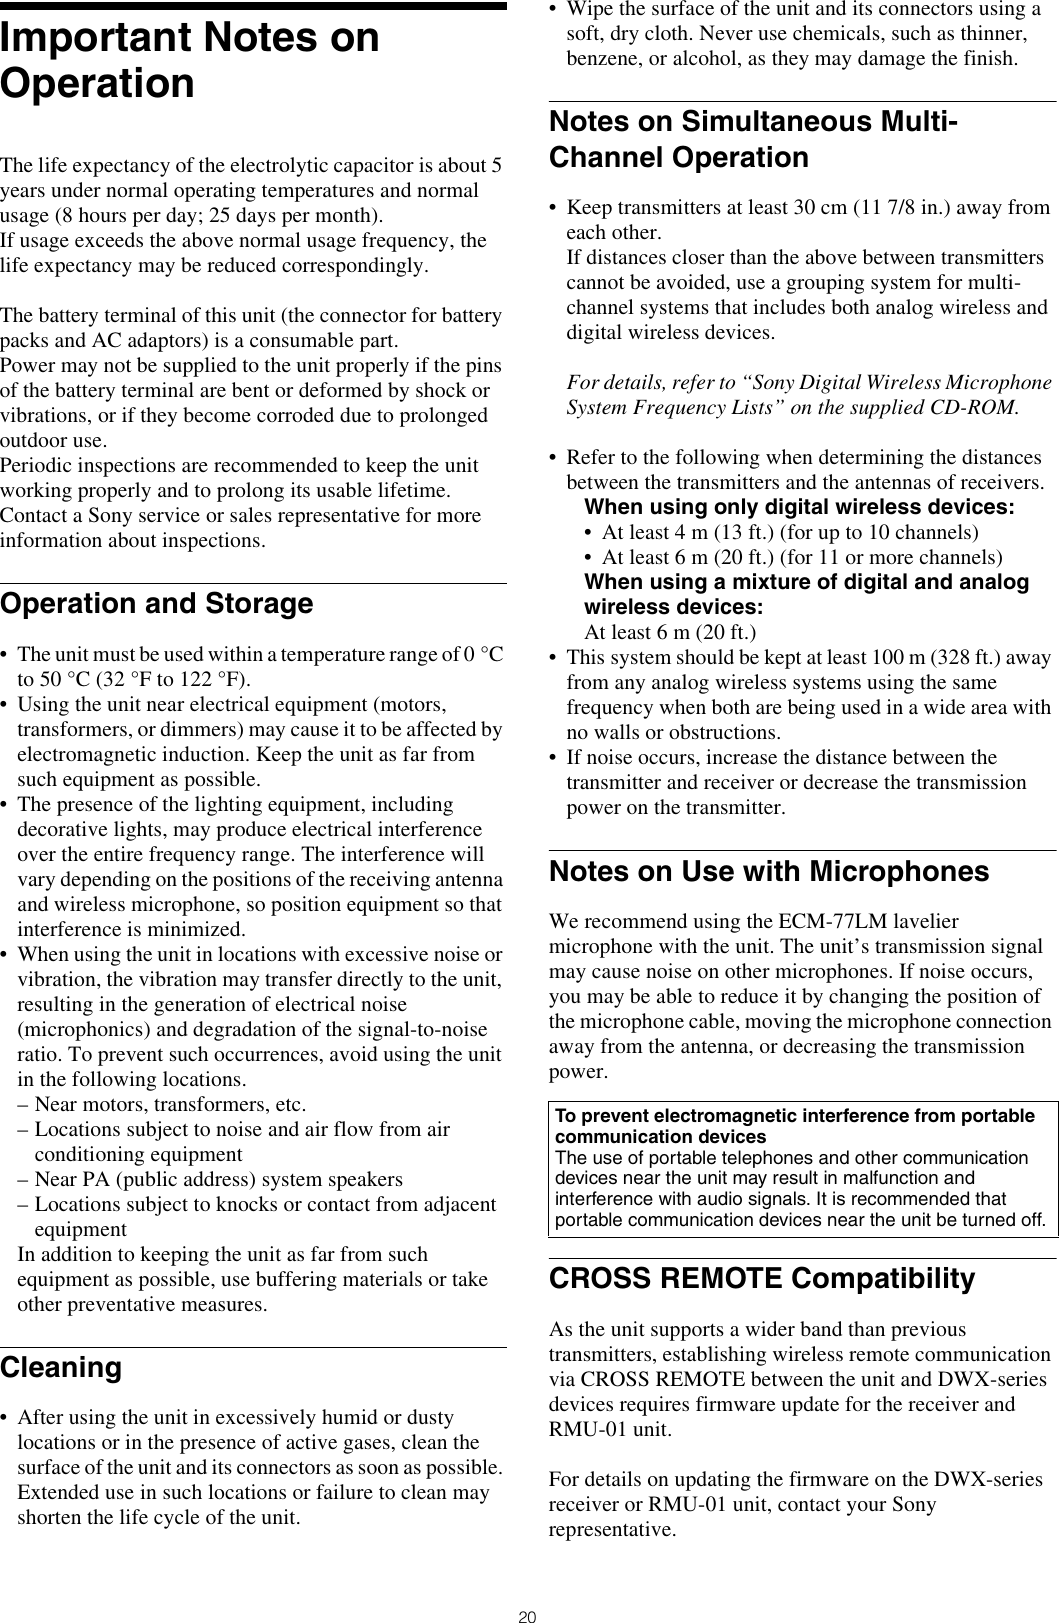 20Important Notes on OperationThe life expectancy of the electrolytic capacitor is about 5 years under normal operating temperatures and normal usage (8 hours per day; 25 days per month).If usage exceeds the above normal usage frequency, the life expectancy may be reduced correspondingly.The battery terminal of this unit (the connector for battery packs and AC adaptors) is a consumable part. Power may not be supplied to the unit properly if the pins of the battery terminal are bent or deformed by shock or vibrations, or if they become corroded due to prolonged outdoor use.Periodic inspections are recommended to keep the unit working properly and to prolong its usable lifetime. Contact a Sony service or sales representative for more information about inspections.Operation and Storage• The unit must be used within a temperature range of 0 °C to 50 °C (32 °F to 122 °F).• Using the unit near electrical equipment (motors, transformers, or dimmers) may cause it to be affected by electromagnetic induction. Keep the unit as far from such equipment as possible.• The presence of the lighting equipment, including decorative lights, may produce electrical interference over the entire frequency range. The interference will vary depending on the positions of the receiving antenna and wireless microphone, so position equipment so that interference is minimized.• When using the unit in locations with excessive noise or vibration, the vibration may transfer directly to the unit, resulting in the generation of electrical noise (microphonics) and degradation of the signal-to-noise ratio. To prevent such occurrences, avoid using the unit in the following locations.– Near motors, transformers, etc.– Locations subject to noise and air flow from air conditioning equipment– Near PA (public address) system speakers– Locations subject to knocks or contact from adjacent equipmentIn addition to keeping the unit as far from such equipment as possible, use buffering materials or take other preventative measures.Cleaning• After using the unit in excessively humid or dusty locations or in the presence of active gases, clean the surface of the unit and its connectors as soon as possible. Extended use in such locations or failure to clean may shorten the life cycle of the unit.• Wipe the surface of the unit and its connectors using a soft, dry cloth. Never use chemicals, such as thinner, benzene, or alcohol, as they may damage the finish.Notes on Simultaneous Multi-Channel Operation• Keep transmitters at least 30 cm (11 7/8 in.) away from each other.If distances closer than the above between transmitters cannot be avoided, use a grouping system for multi-channel systems that includes both analog wireless and digital wireless devices.For details, refer to “Sony Digital Wireless Microphone System Frequency Lists” on the supplied CD-ROM.• Refer to the following when determining the distances between the transmitters and the antennas of receivers.When using only digital wireless devices:• At least 4 m (13 ft.) (for up to 10 channels)• At least 6 m (20 ft.) (for 11 or more channels)When using a mixture of digital and analog wireless devices:At least 6 m (20 ft.)• This system should be kept at least 100 m (328 ft.) away from any analog wireless systems using the same frequency when both are being used in a wide area with no walls or obstructions.• If noise occurs, increase the distance between the transmitter and receiver or decrease the transmission power on the transmitter.Notes on Use with MicrophonesWe recommend using the ECM-77LM lavelier microphone with the unit. The unit’s transmission signal may cause noise on other microphones. If noise occurs, you may be able to reduce it by changing the position of the microphone cable, moving the microphone connection away from the antenna, or decreasing the transmission power.CROSS REMOTE CompatibilityAs the unit supports a wider band than previous transmitters, establishing wireless remote communication via CROSS REMOTE between the unit and DWX-series devices requires firmware update for the receiver and RMU-01 unit.For details on updating the firmware on the DWX-series receiver or RMU-01 unit, contact your Sony representative.To prevent electromagnetic interference from portable communication devicesThe use of portable telephones and other communication devices near the unit may result in malfunction and interference with audio signals. It is recommended that portable communication devices near the unit be turned off.